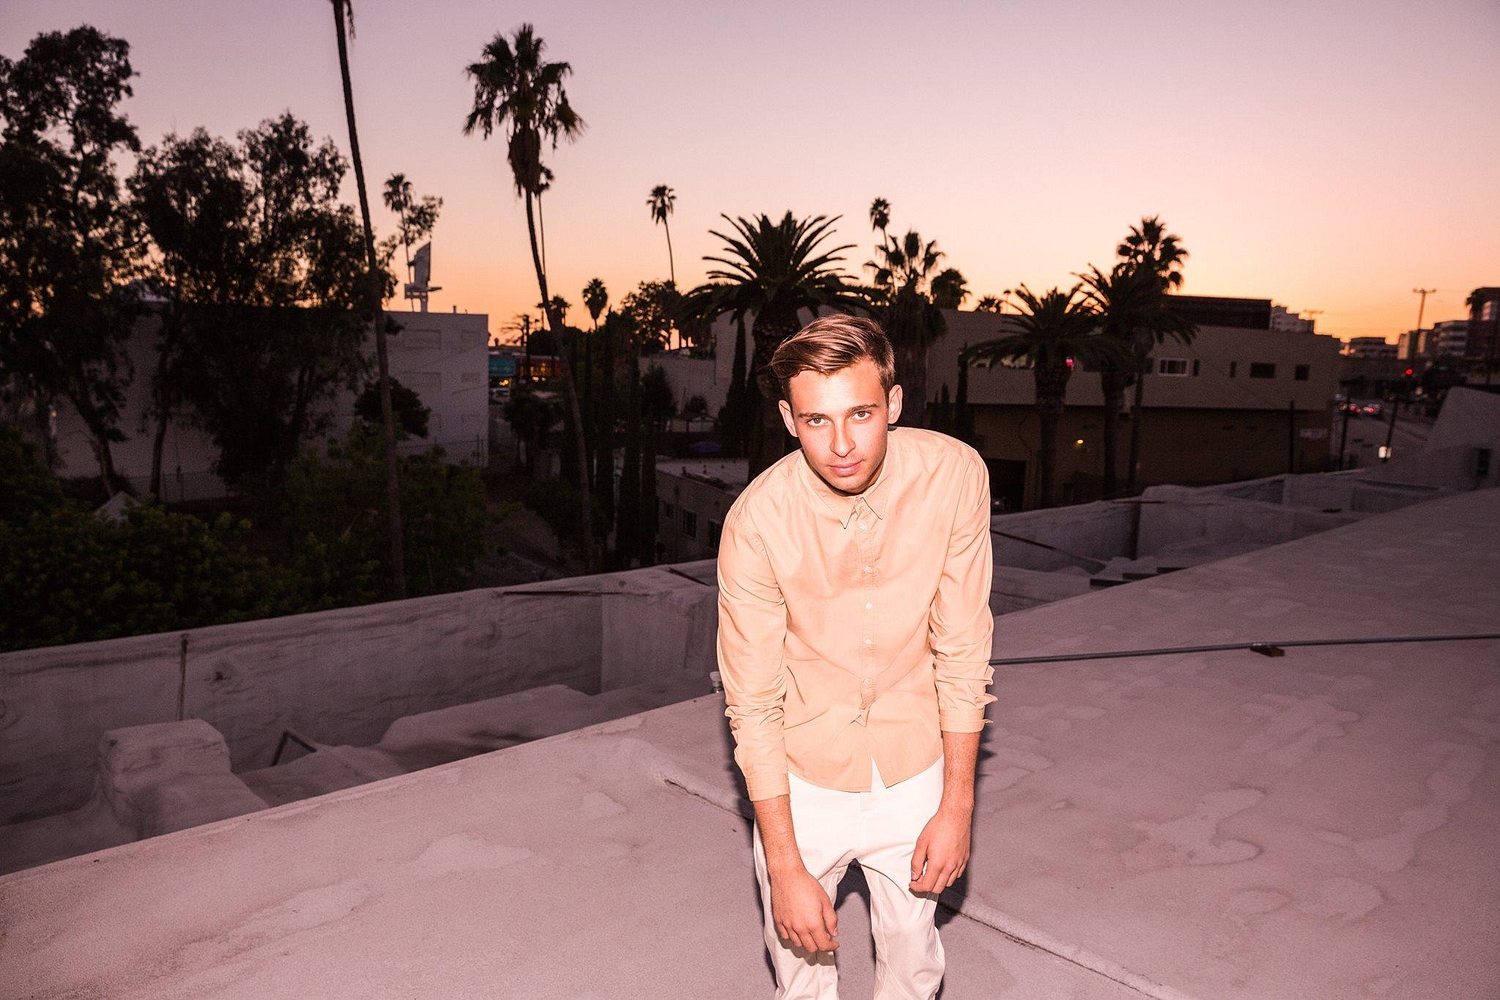 Flume performs live session at Maida Vale for BBC Radio 1